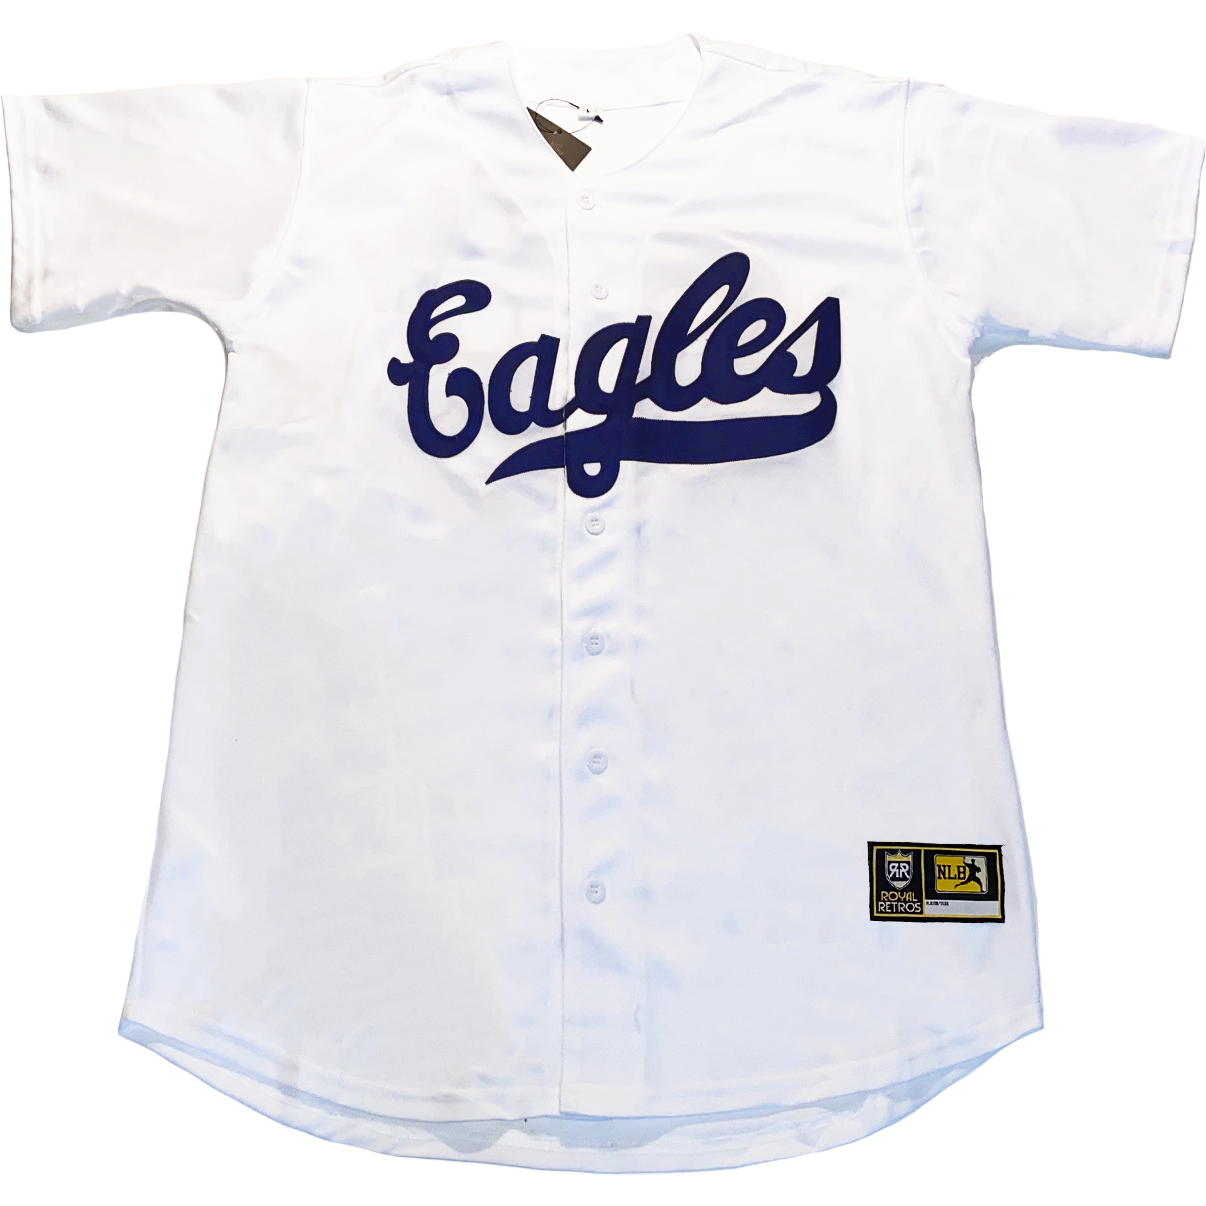 eagles jersey youth small